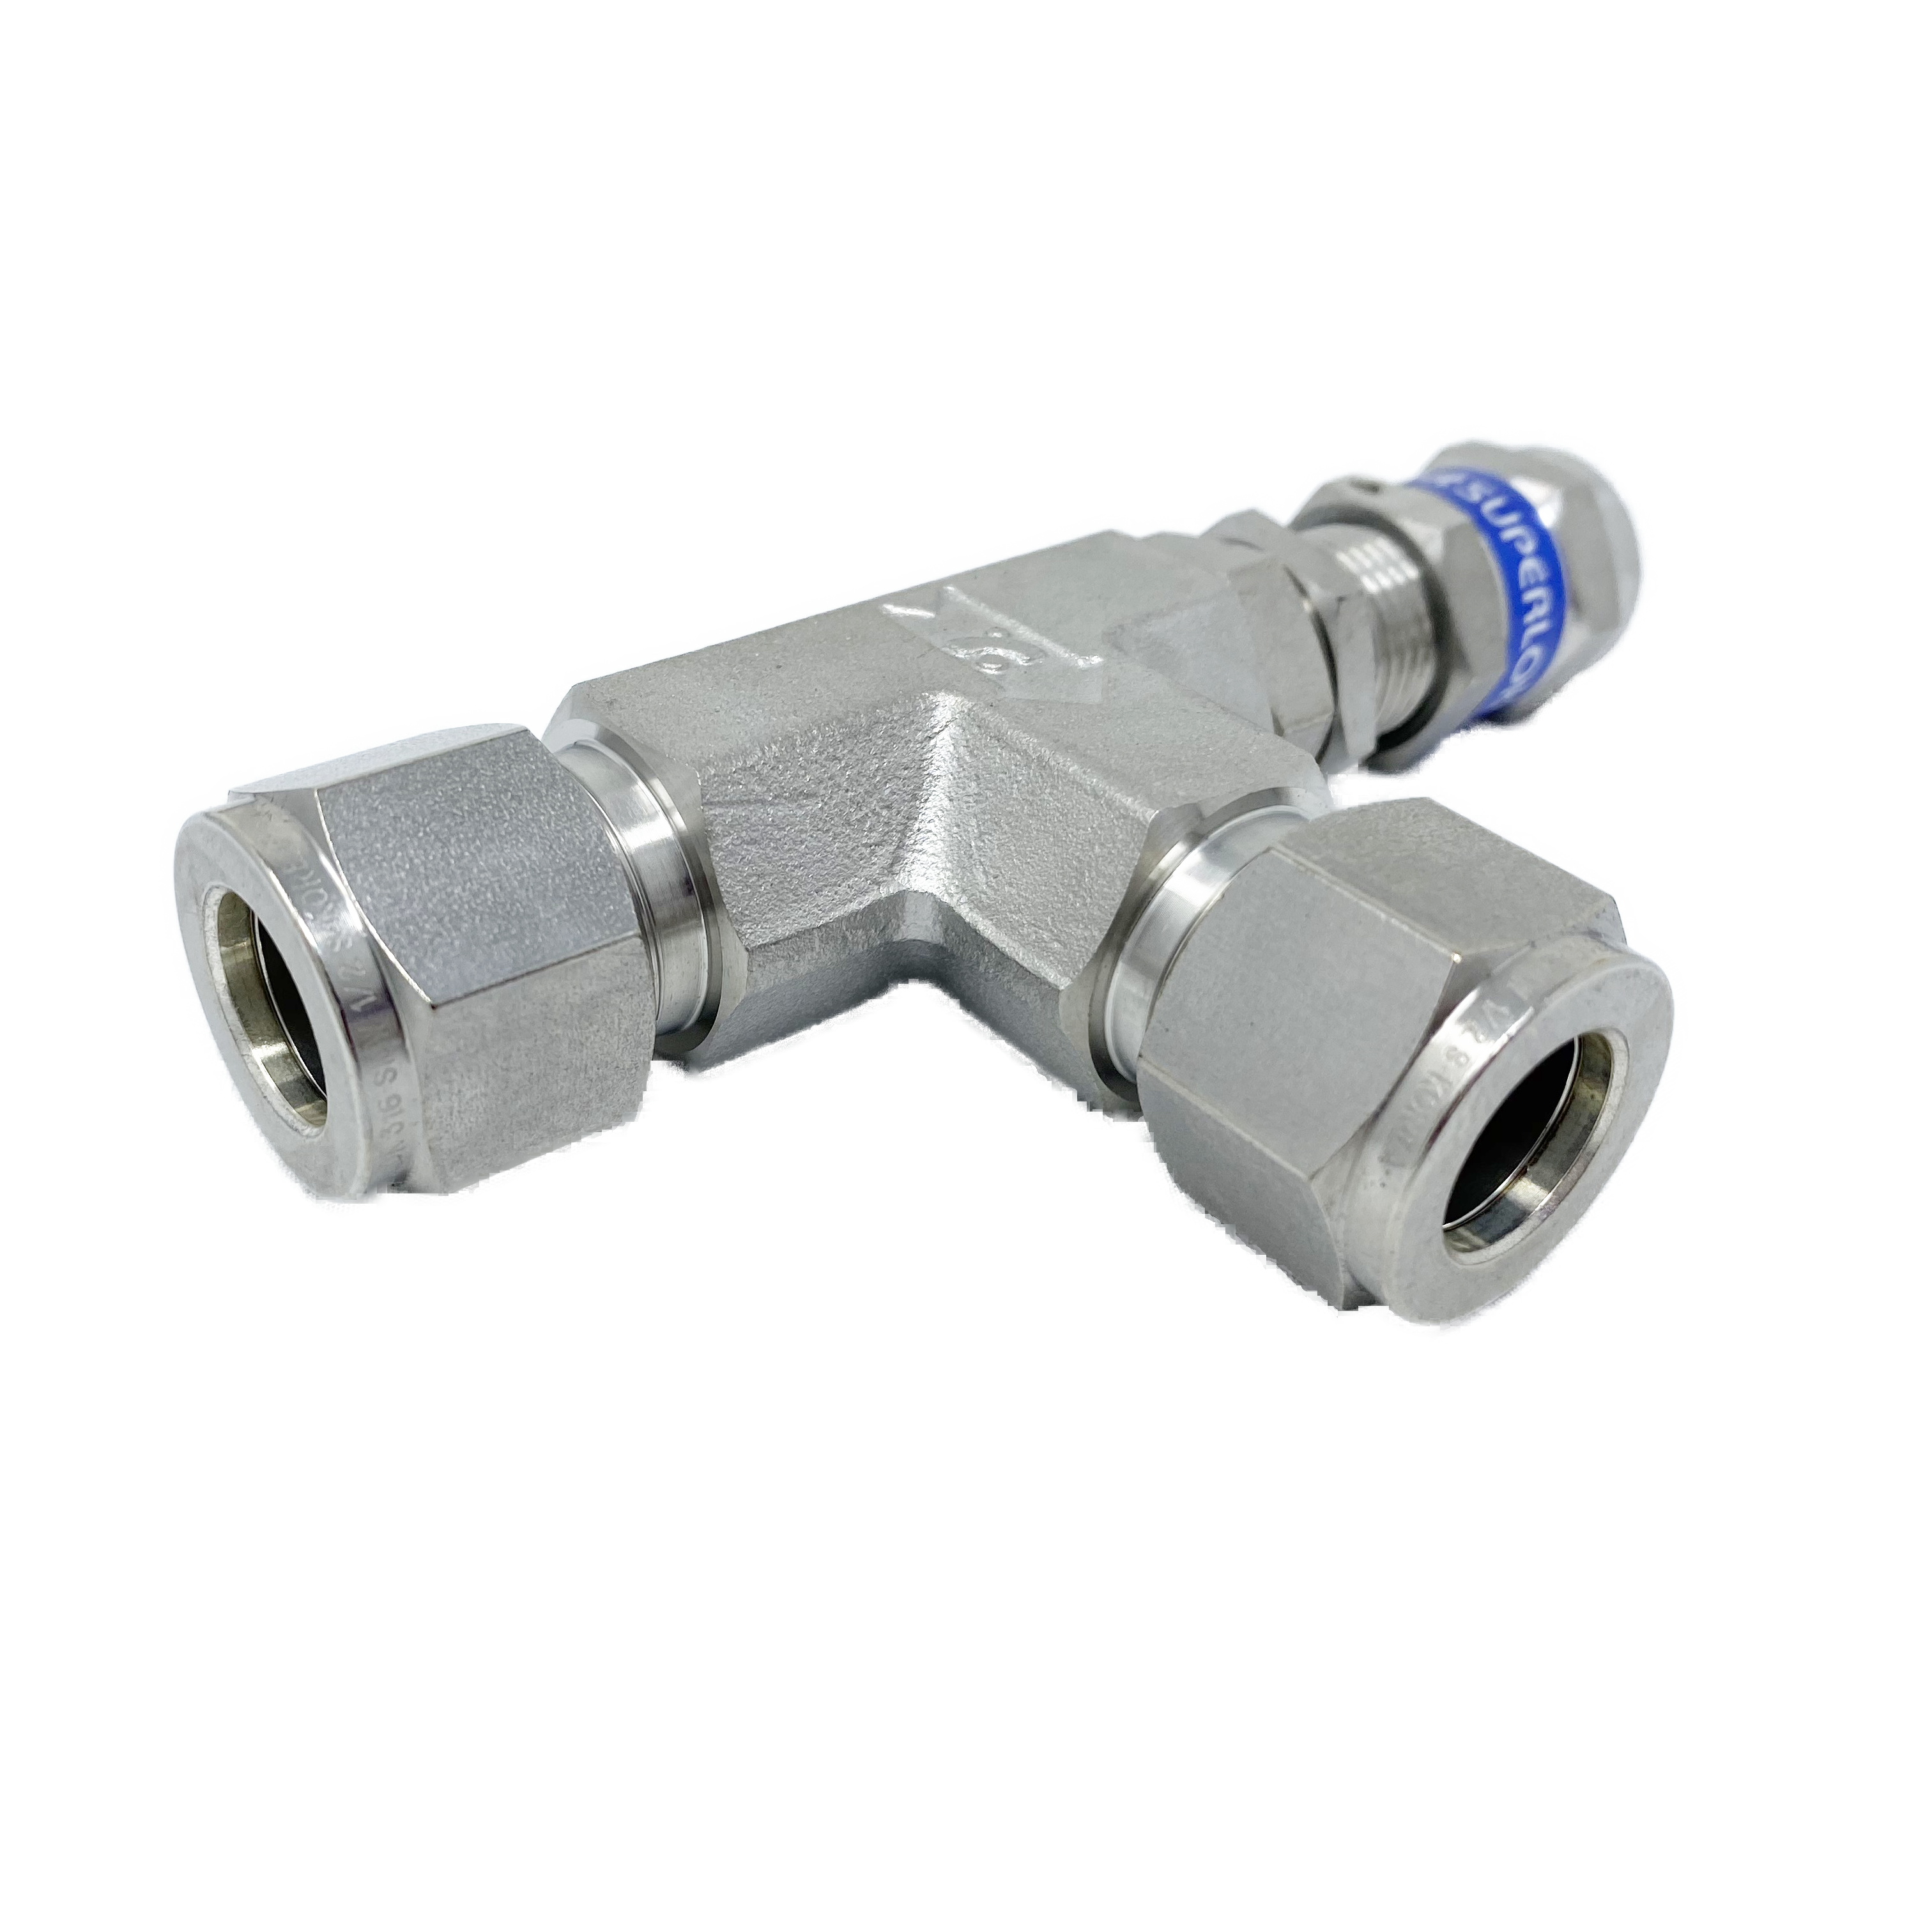 SRVL-S-4 : Superlok Inline Relief Valve, 1/4" O.D. Tube, Angle Pattern, Low Pressure, 300psi, 316SS, No Spring